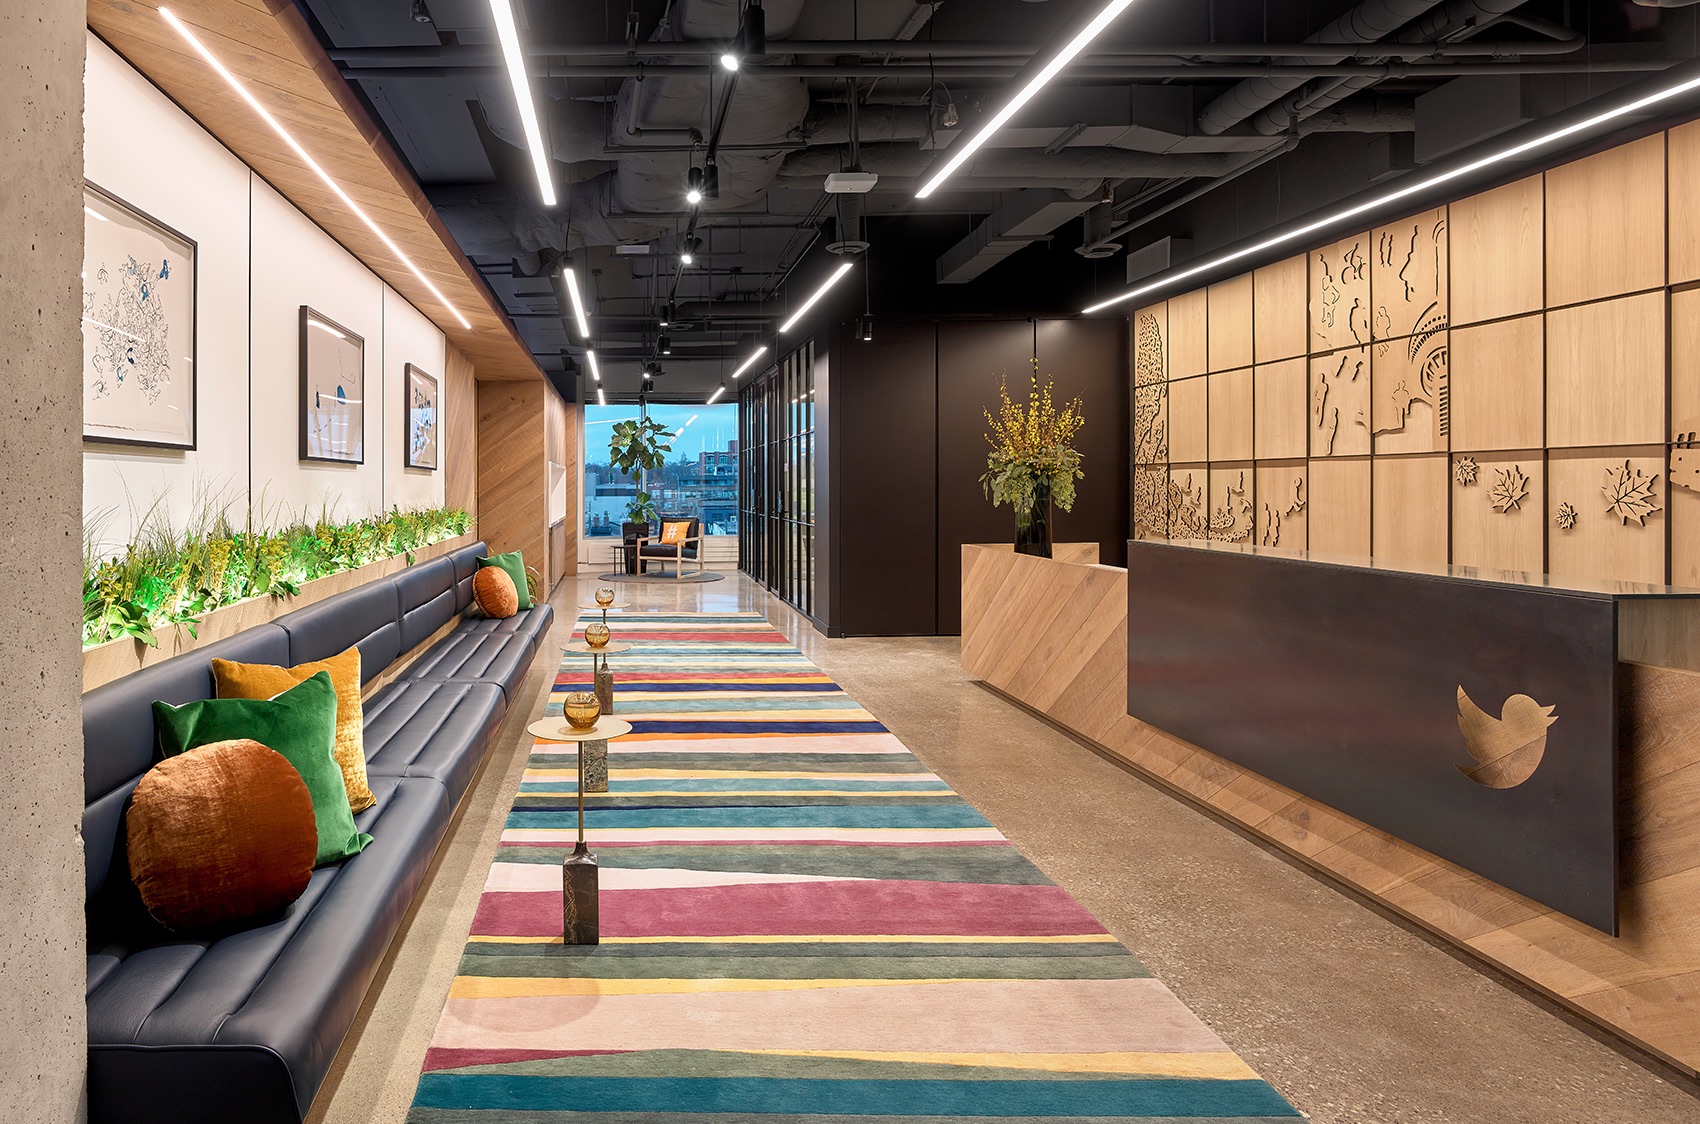 A Tour of Twitter's Biophilic Toronto Office - Officelovin'